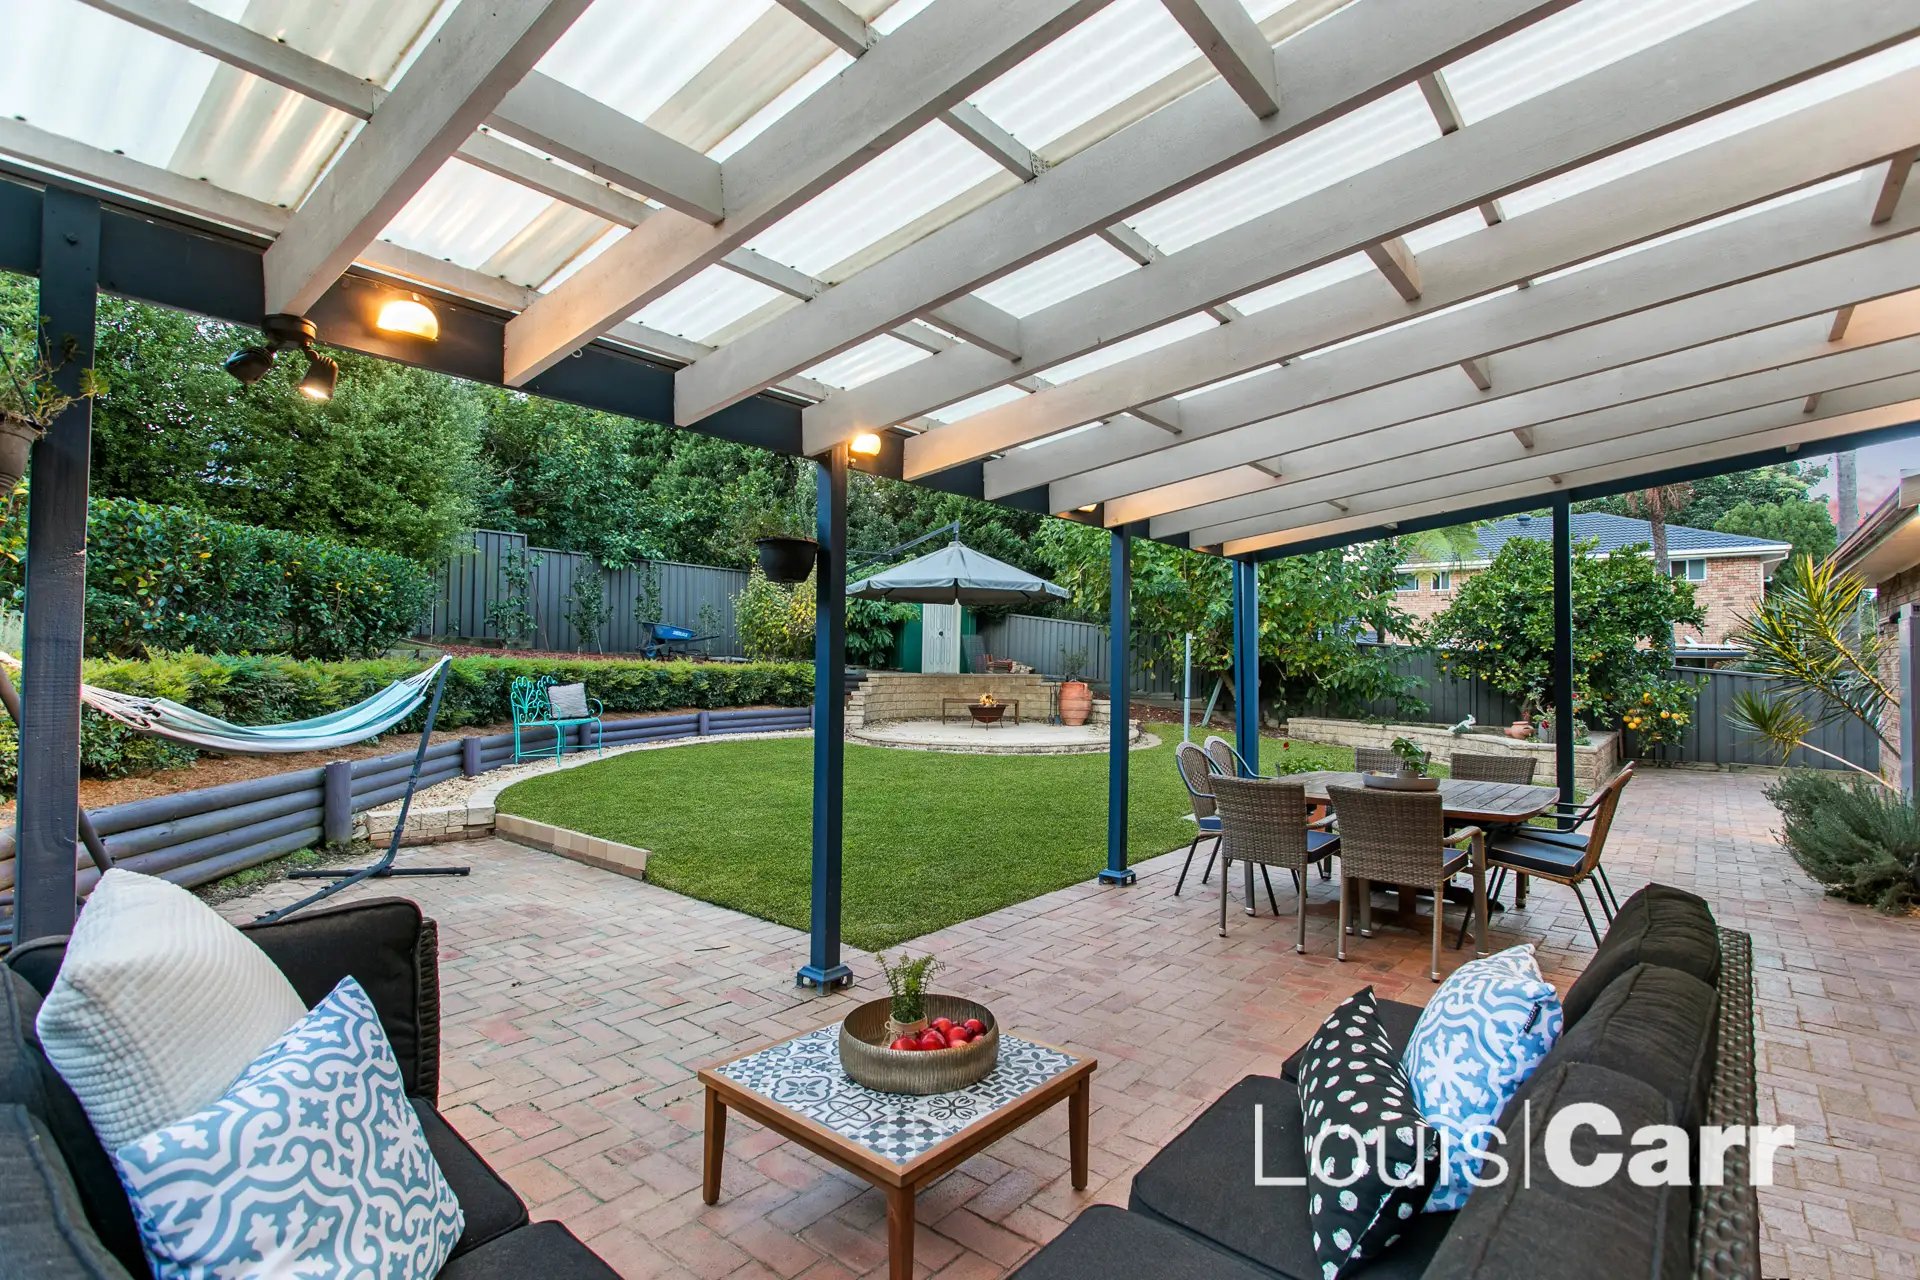 Photo #8: 9 Kullaroo Avenue, Castle Hill - Sold by Louis Carr Real Estate